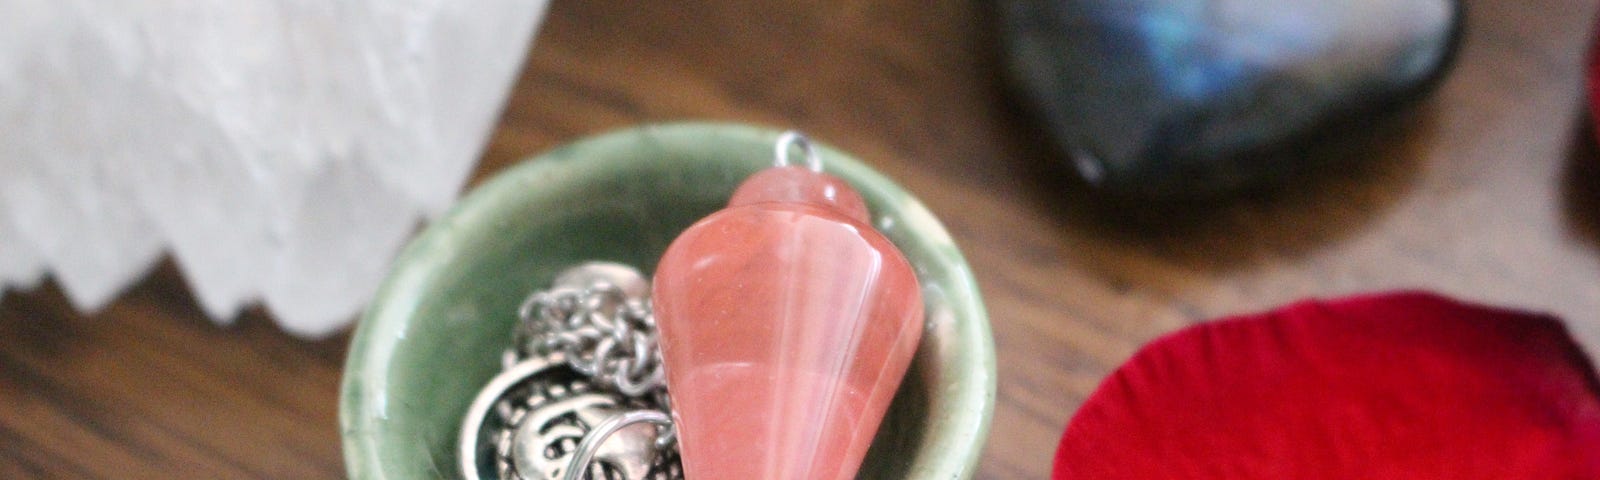 this is a photo of some crystals including a pink pendulum in a bowl.